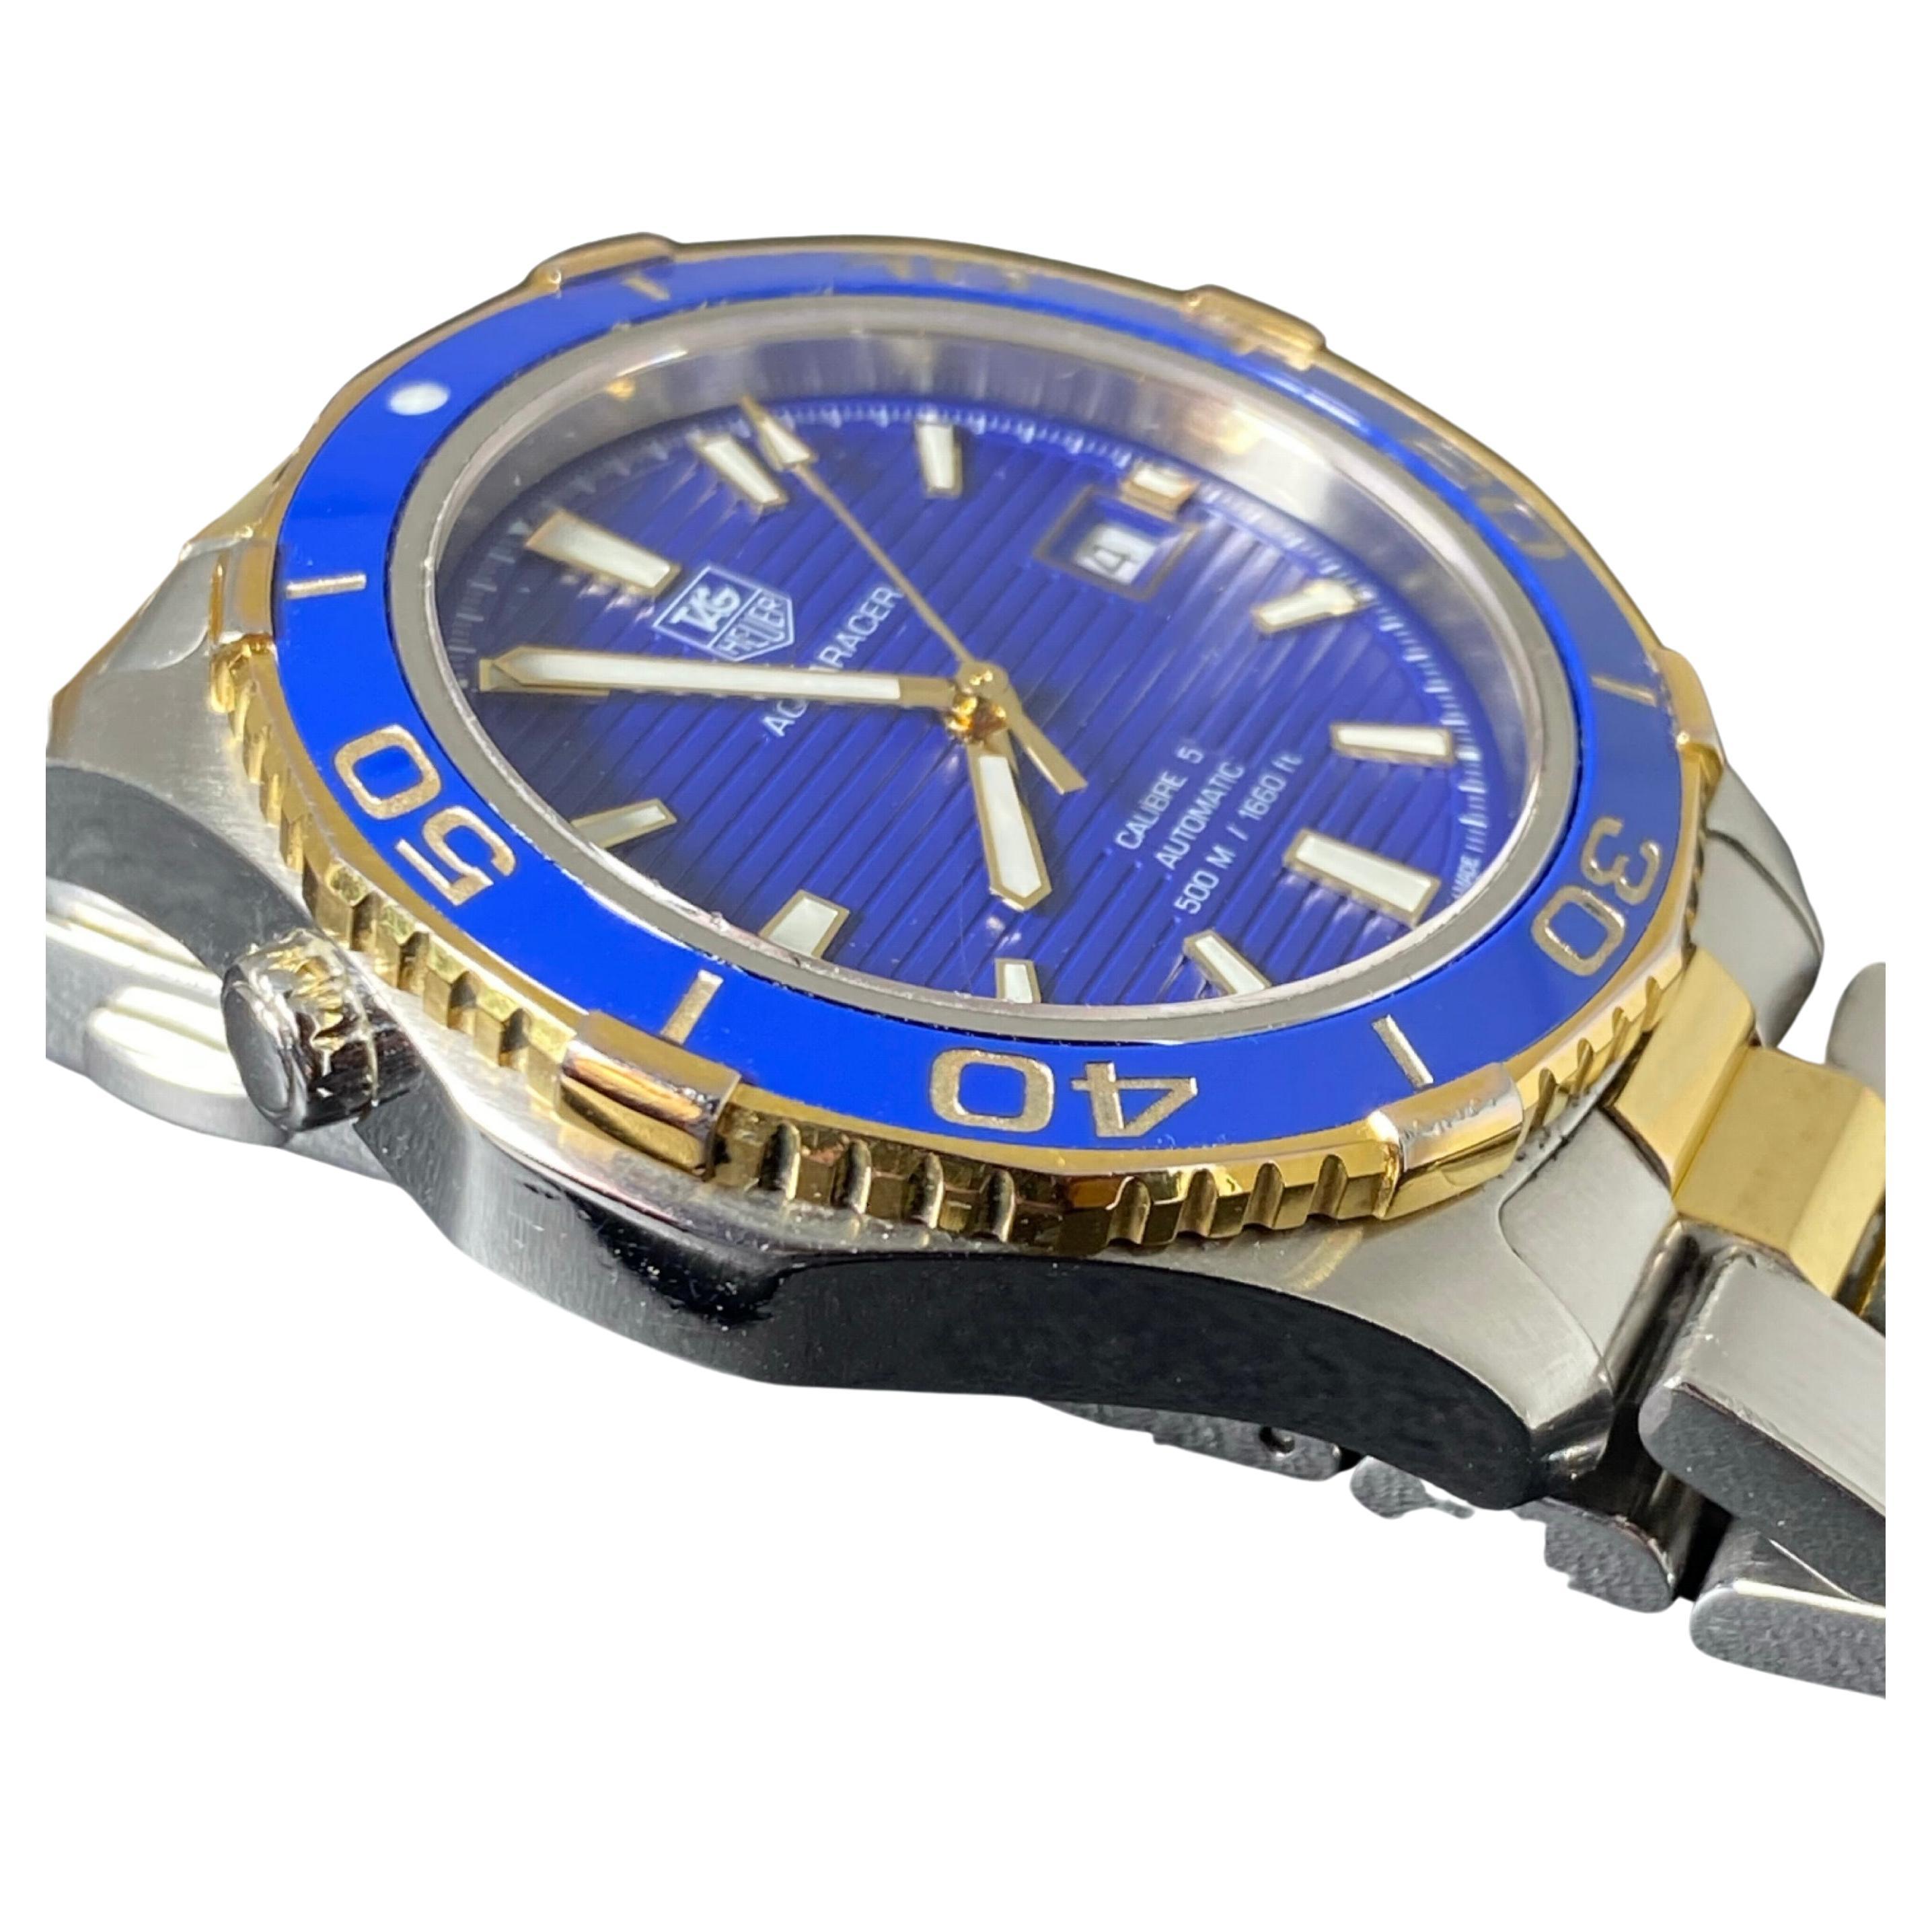 Rarely seen Tag Heuer Aquaracer dates from circa 2014, 
yet it's in great condition & in excellent working order

~~~

41mm Stainless Steel Case is waterproof 500m, 
featuring a gold-plated & blue ceramic bezel
adorned by gold-plated winder & the